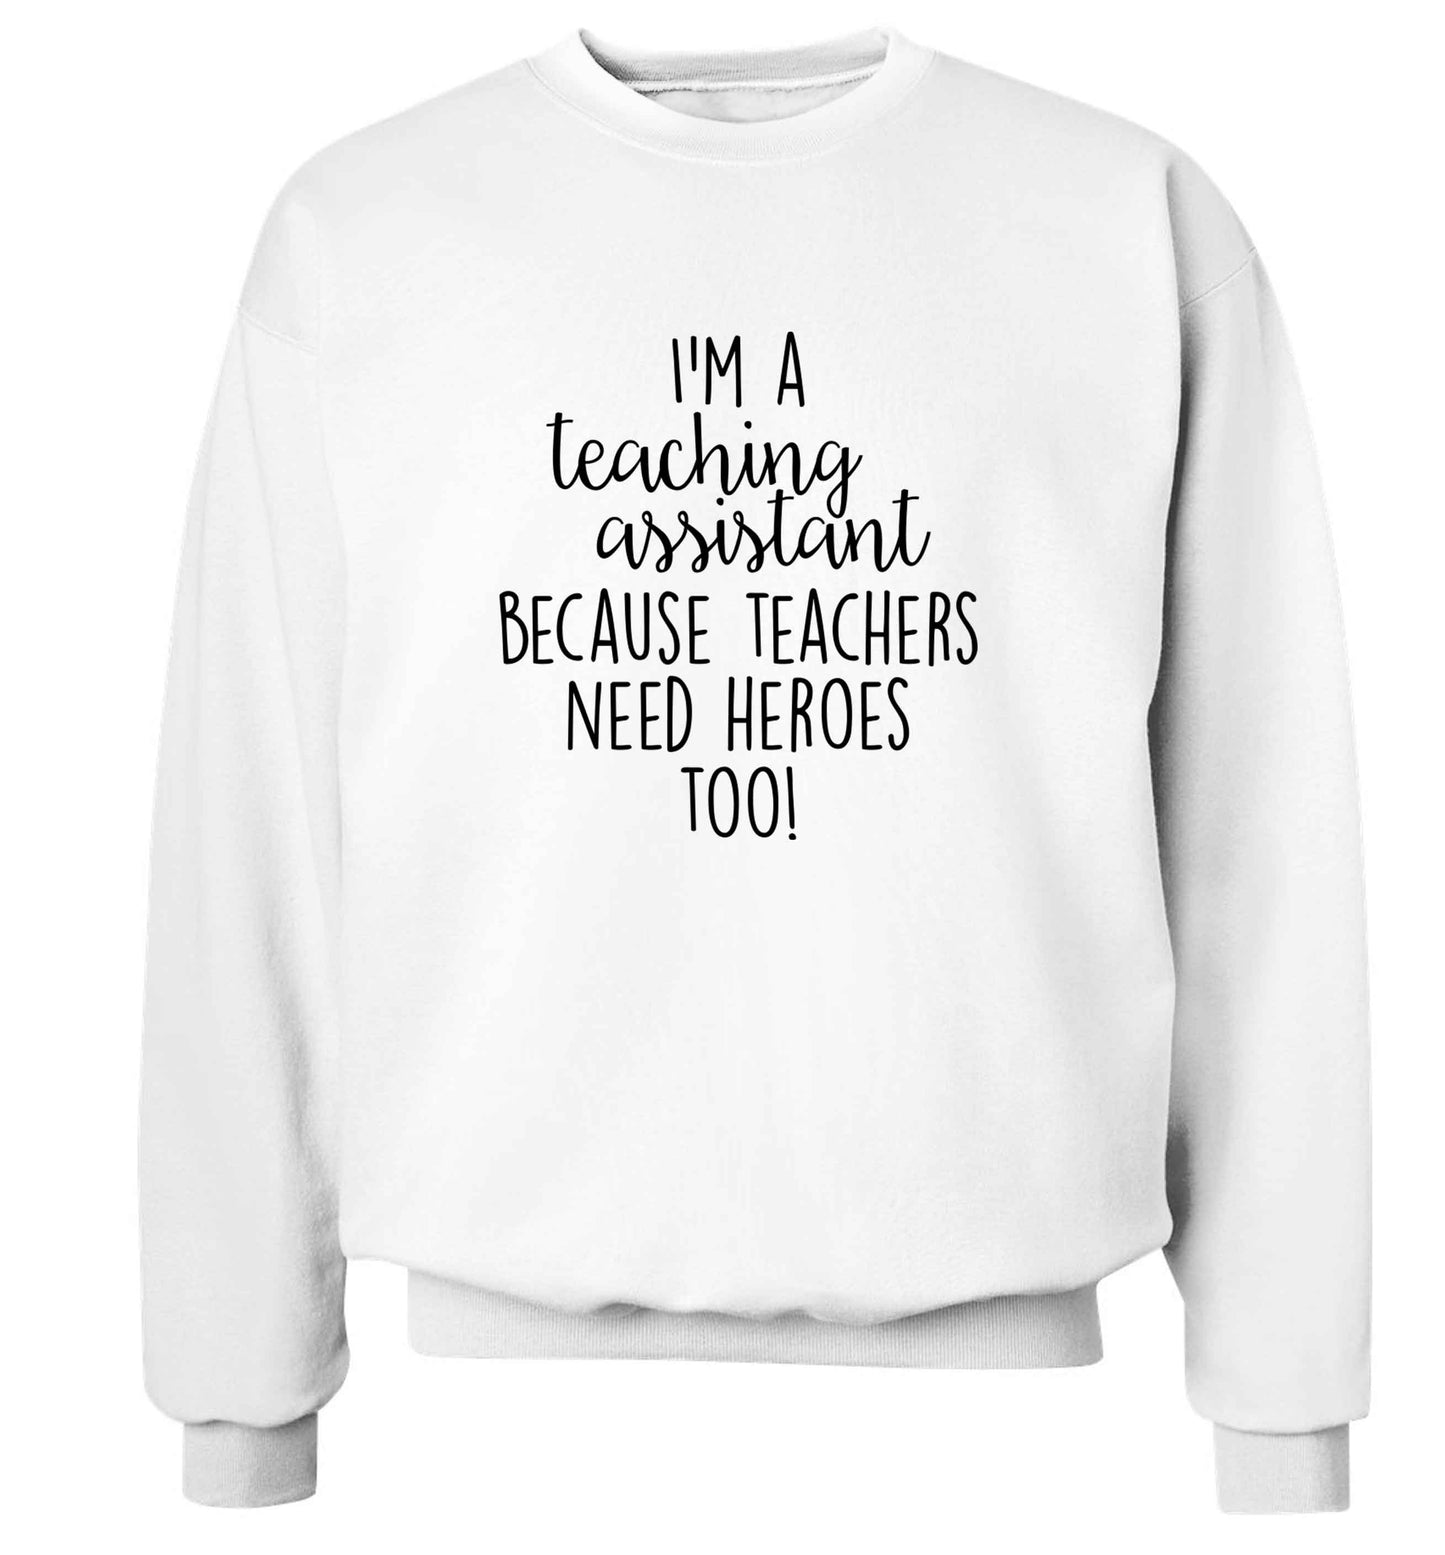 I'm a teaching assistant because teachers need heroes too! adult's unisex white sweater 2XL